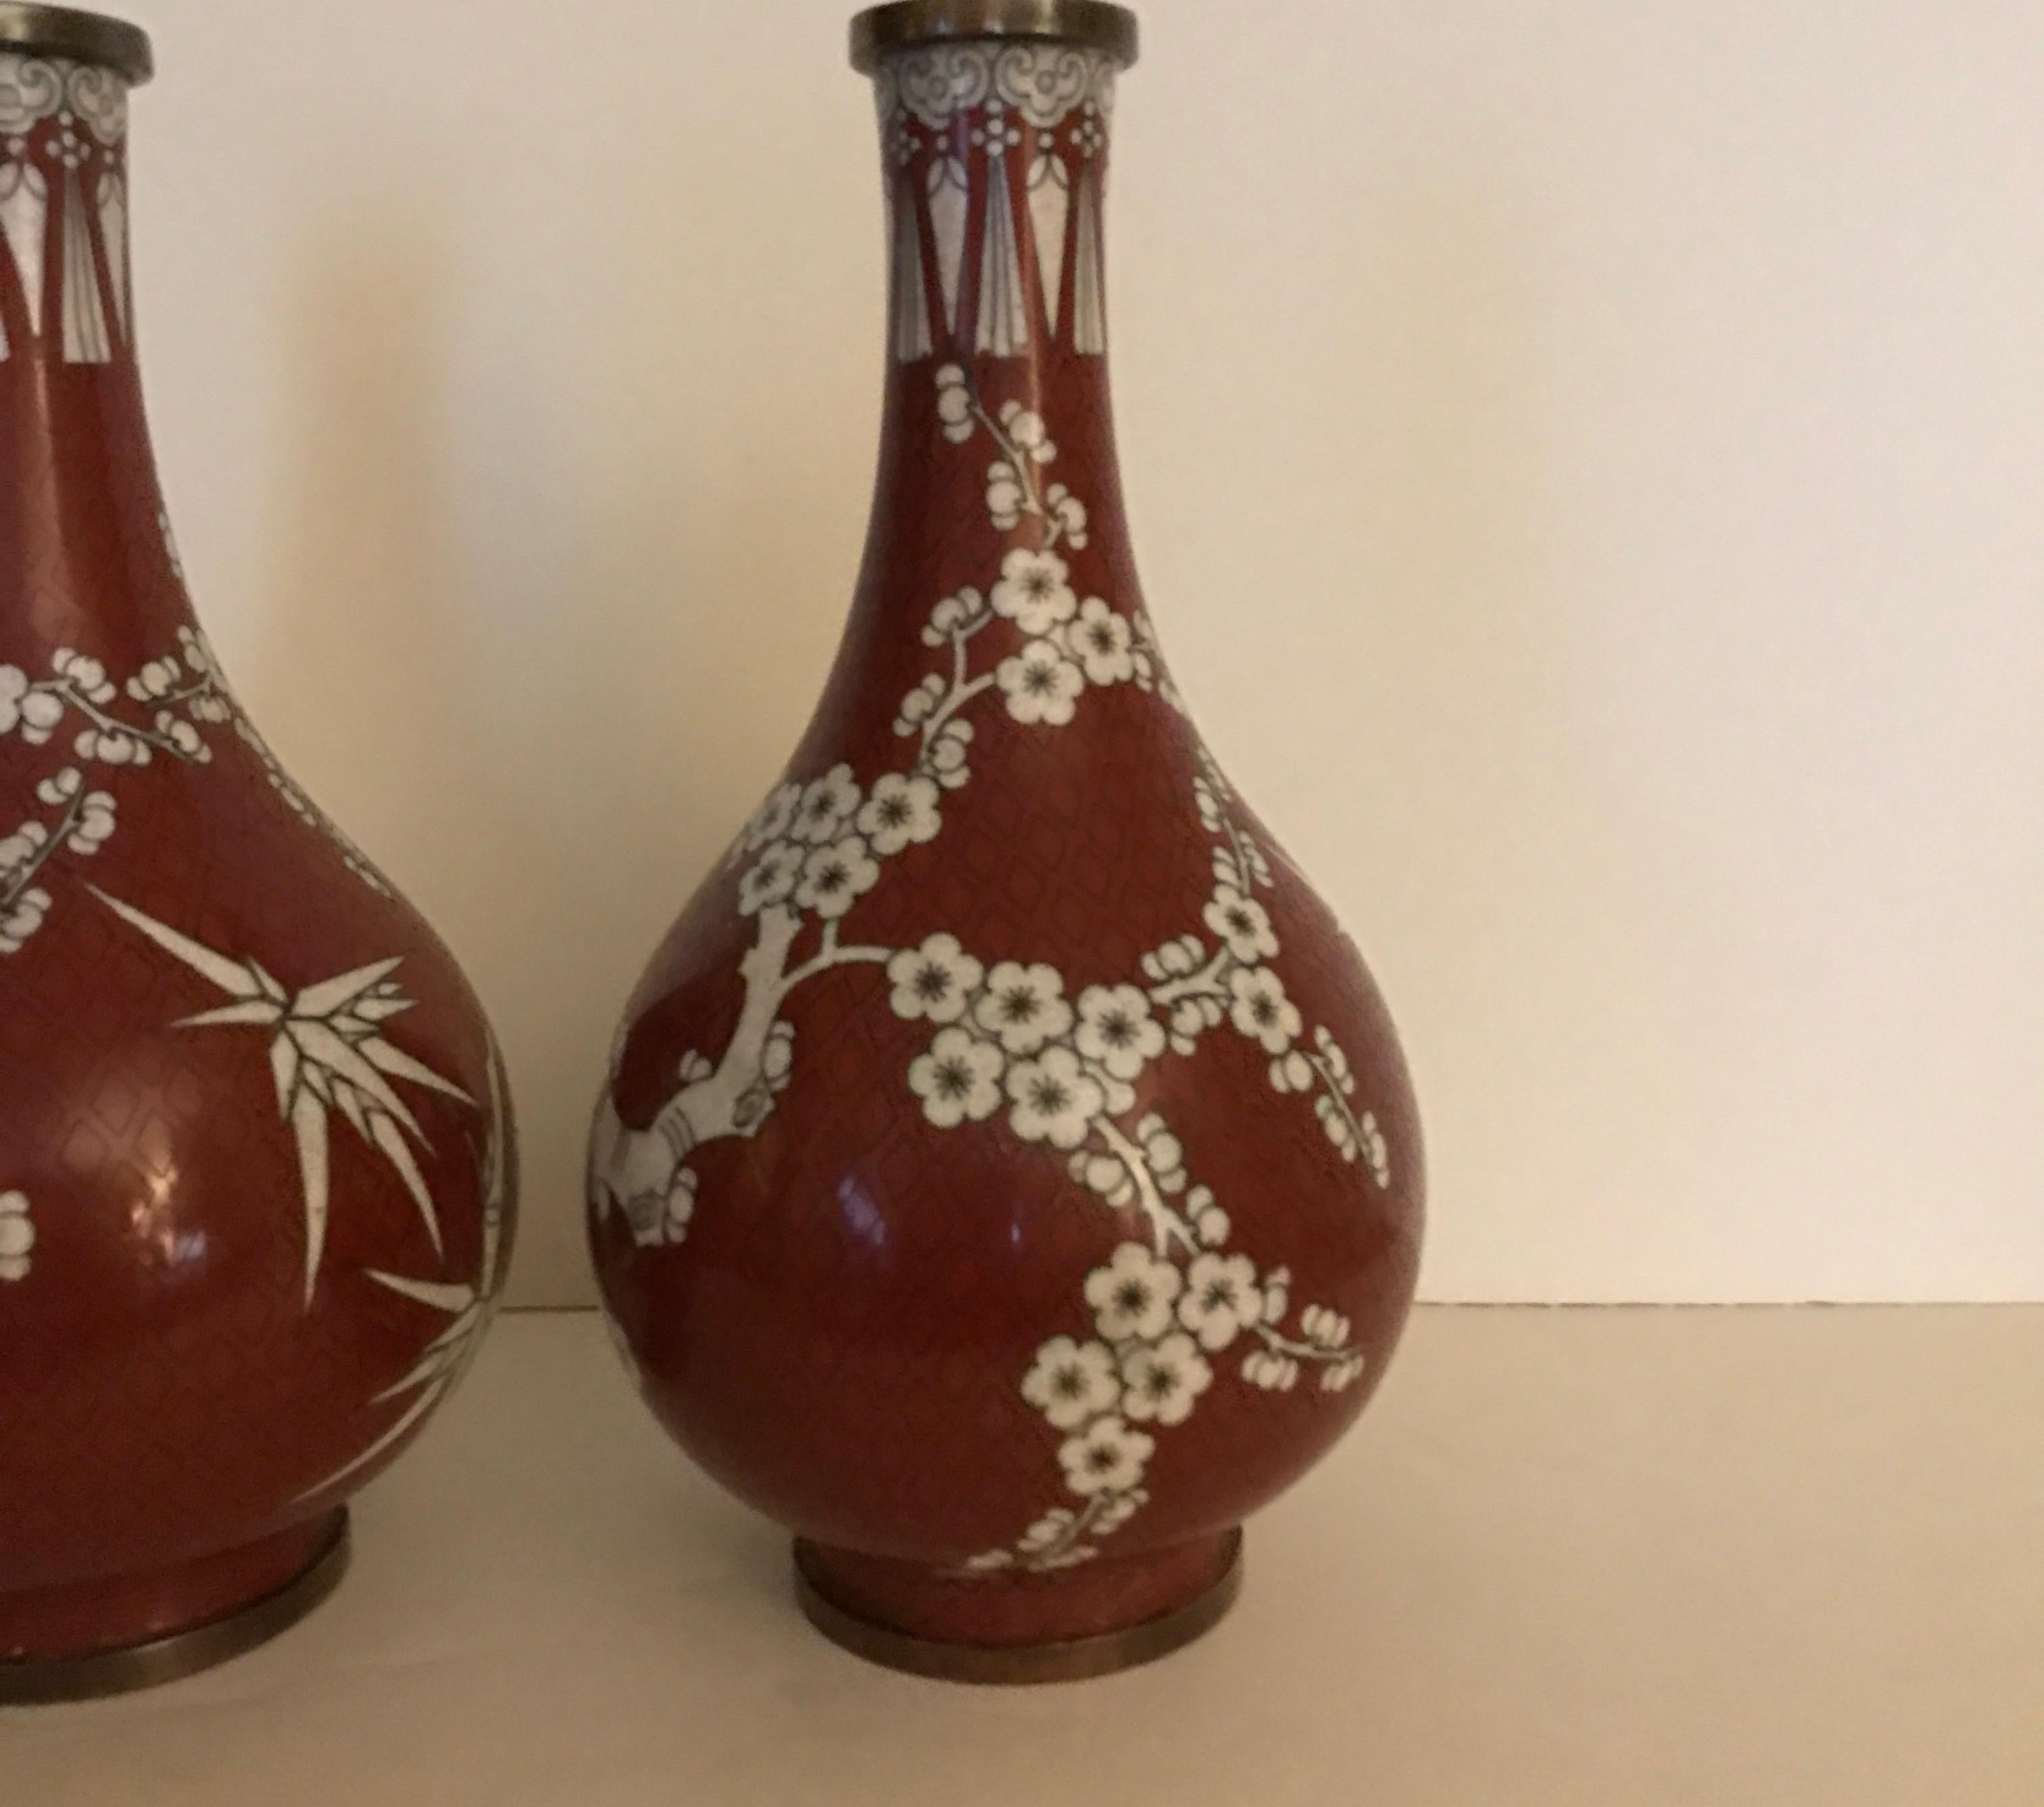 A pair of Chinese Cloisonne vases in cinnabar and white color. The gord form with slim taper neck and bulbous body. The pattern is cherry blossom with bamboo branches.... Antique Chinese, circa 1900.